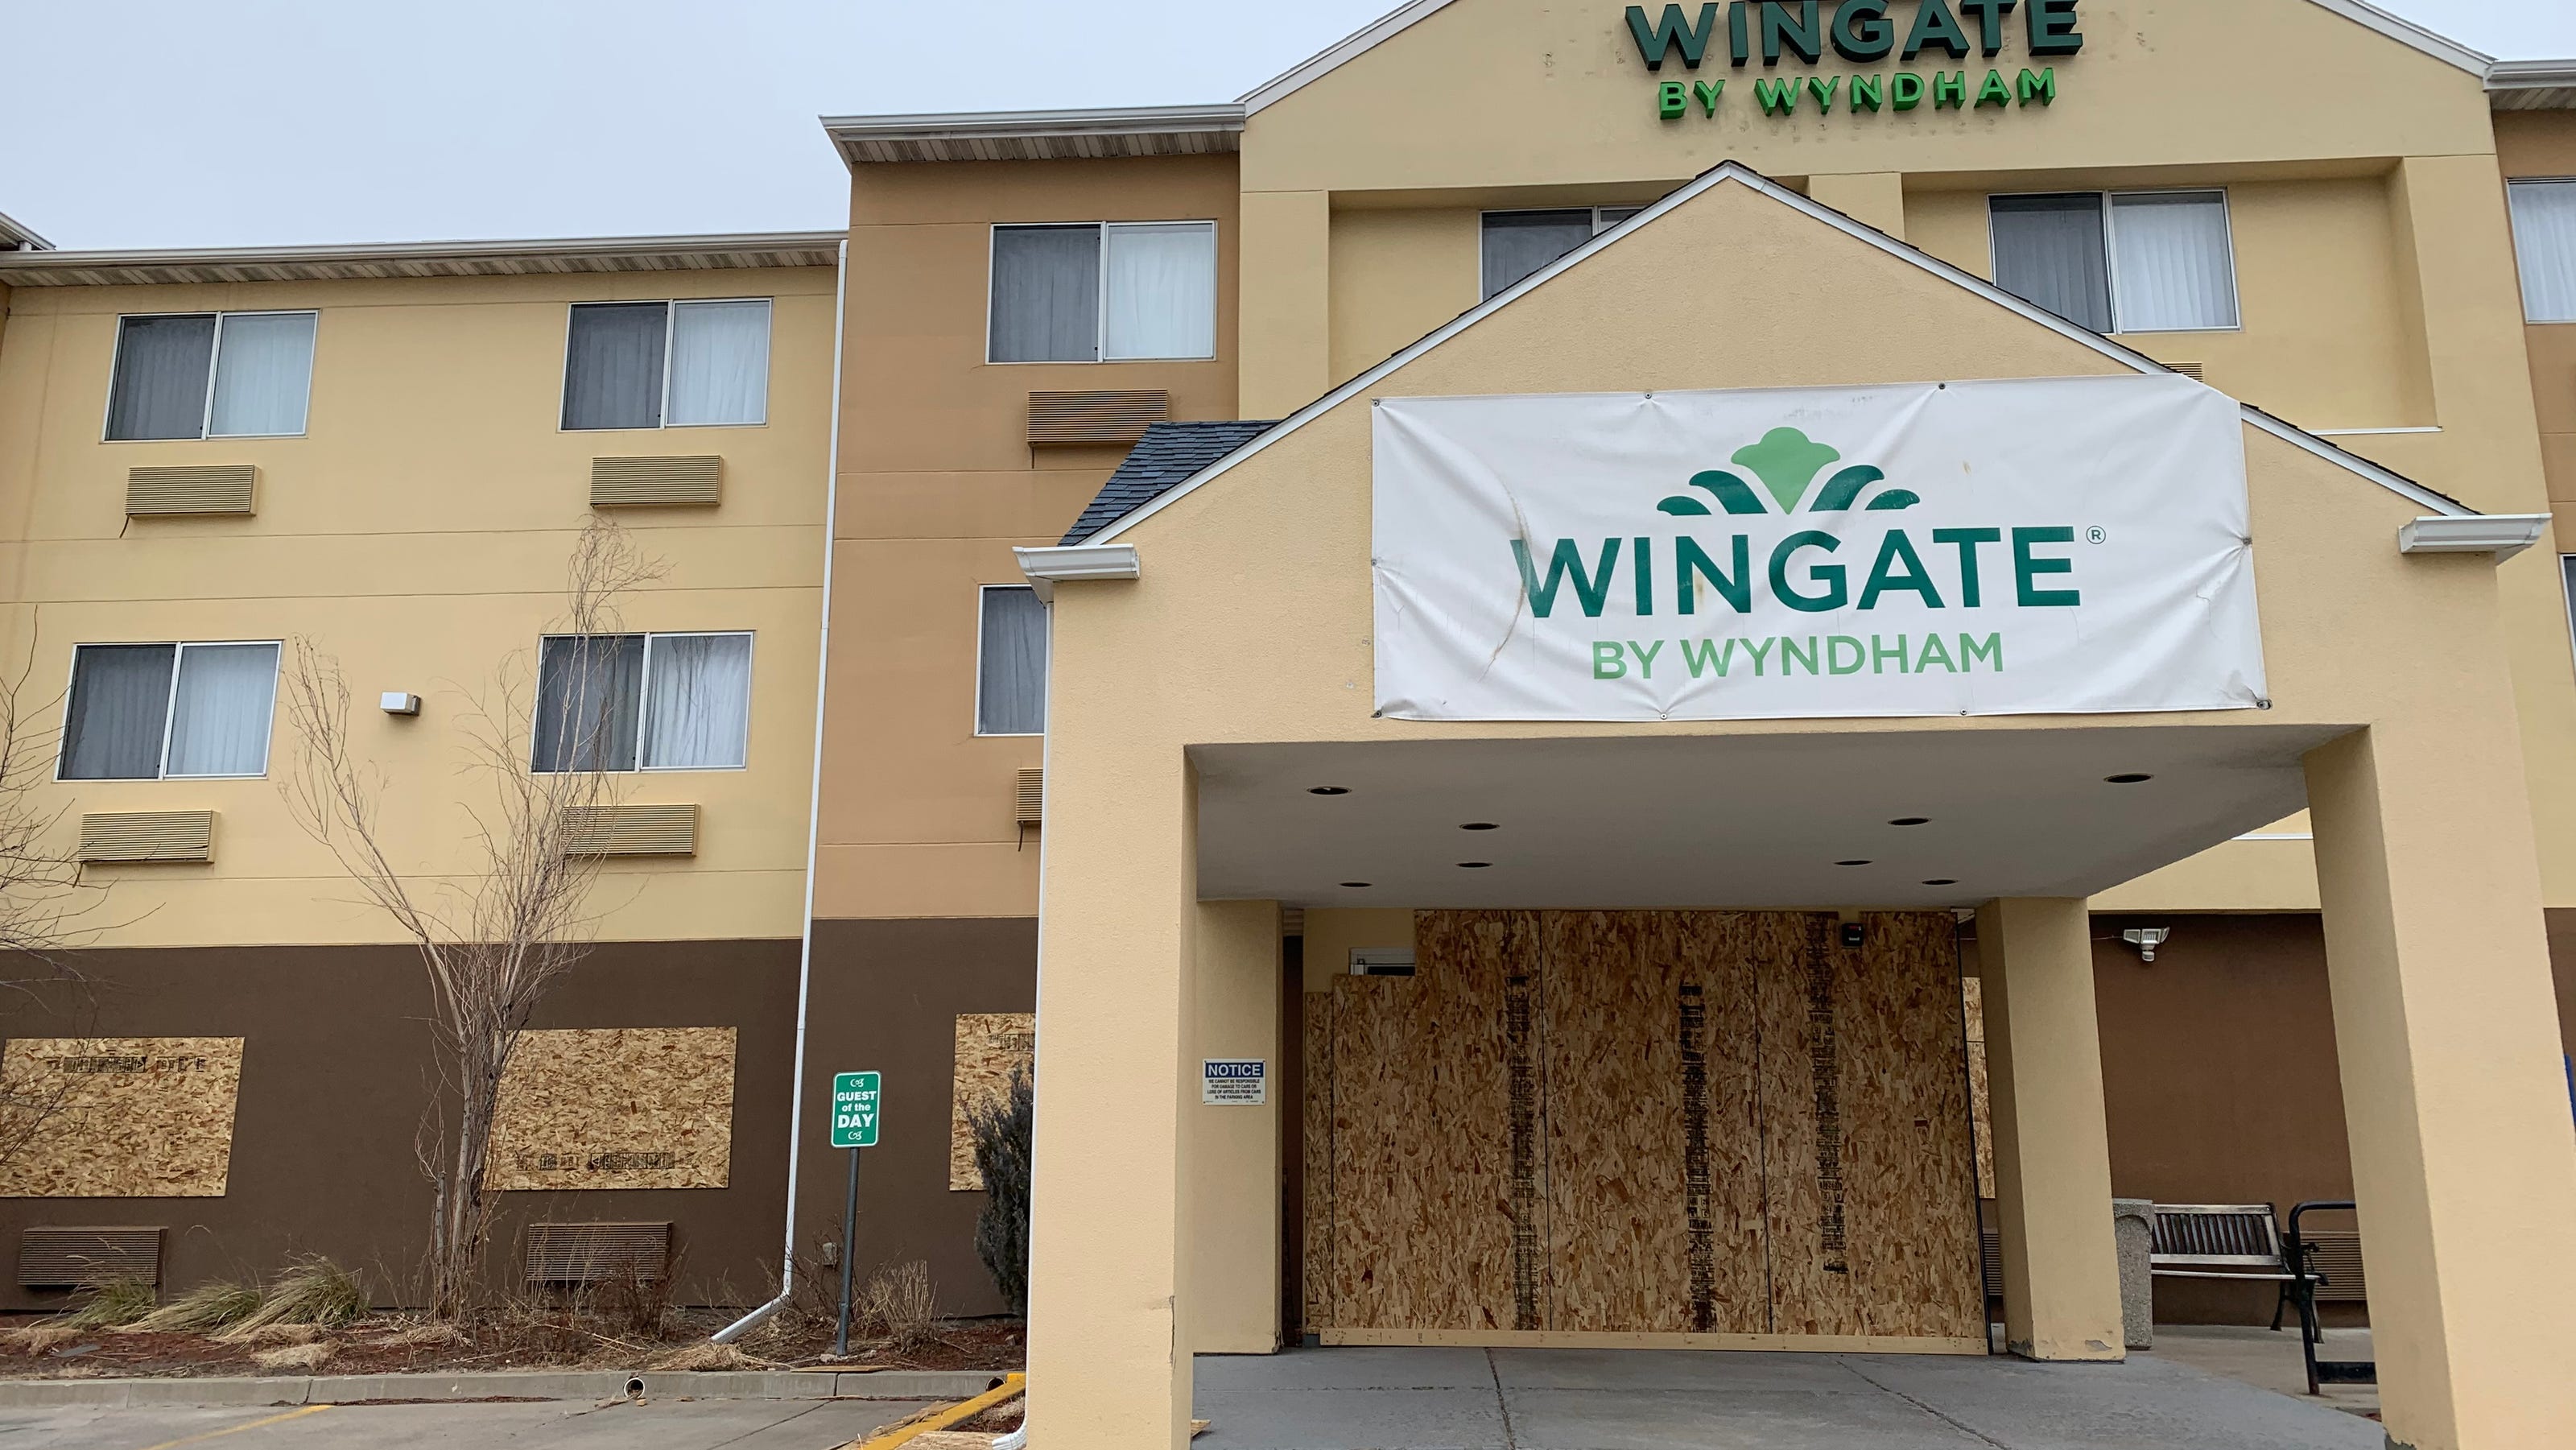 Wingate Wyndham hotel Great Falls temporarily closed amid COVID-19